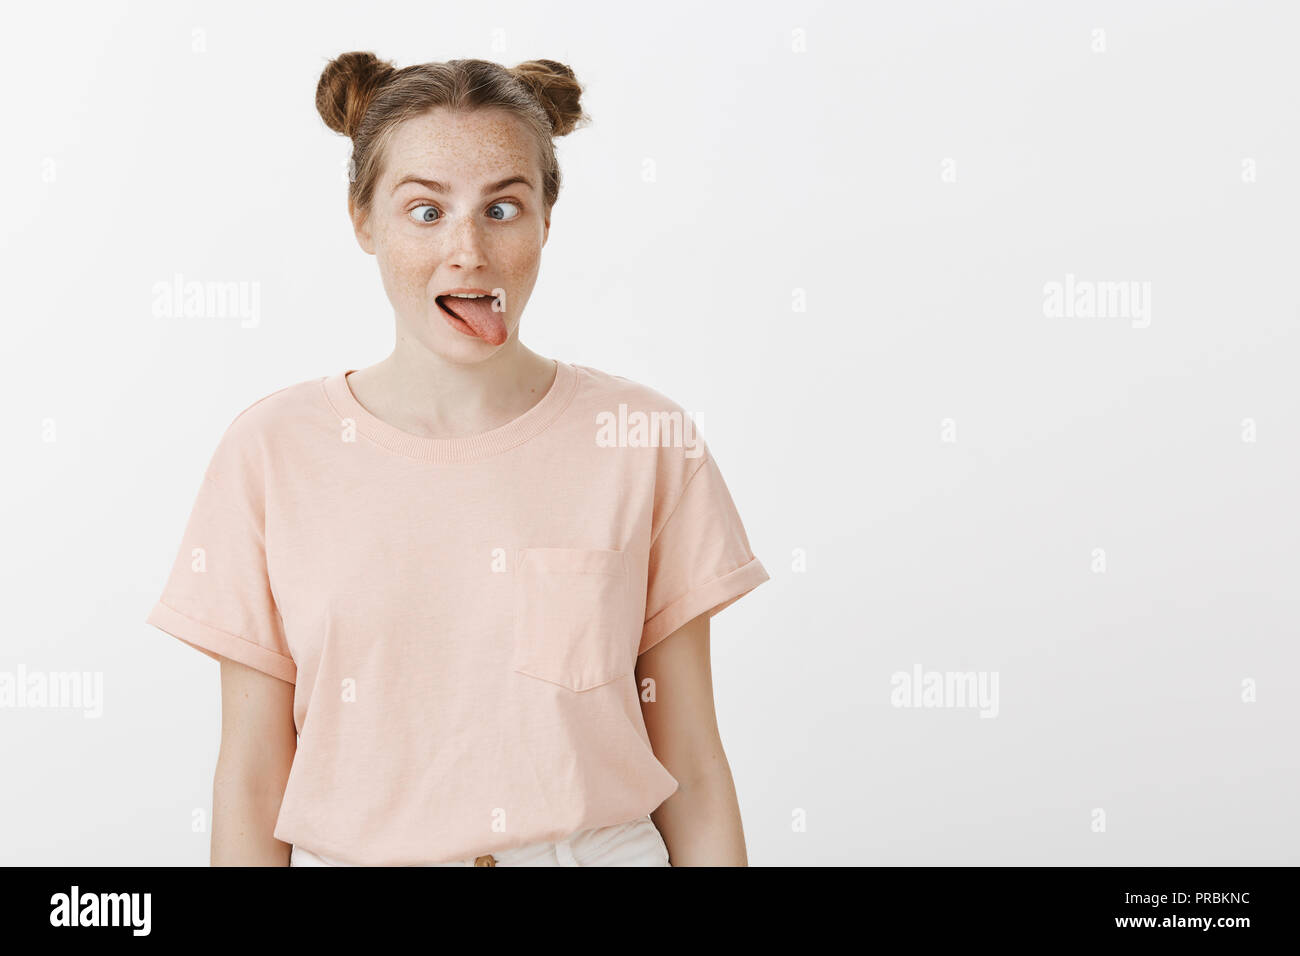 Playful bored girl with buns hairstyle and freckles in trendy pink t-shirt, sticking out tongue and squinting, being childish while having nothing to do, expressing joyful lifestyle over grey wall Stock Photo